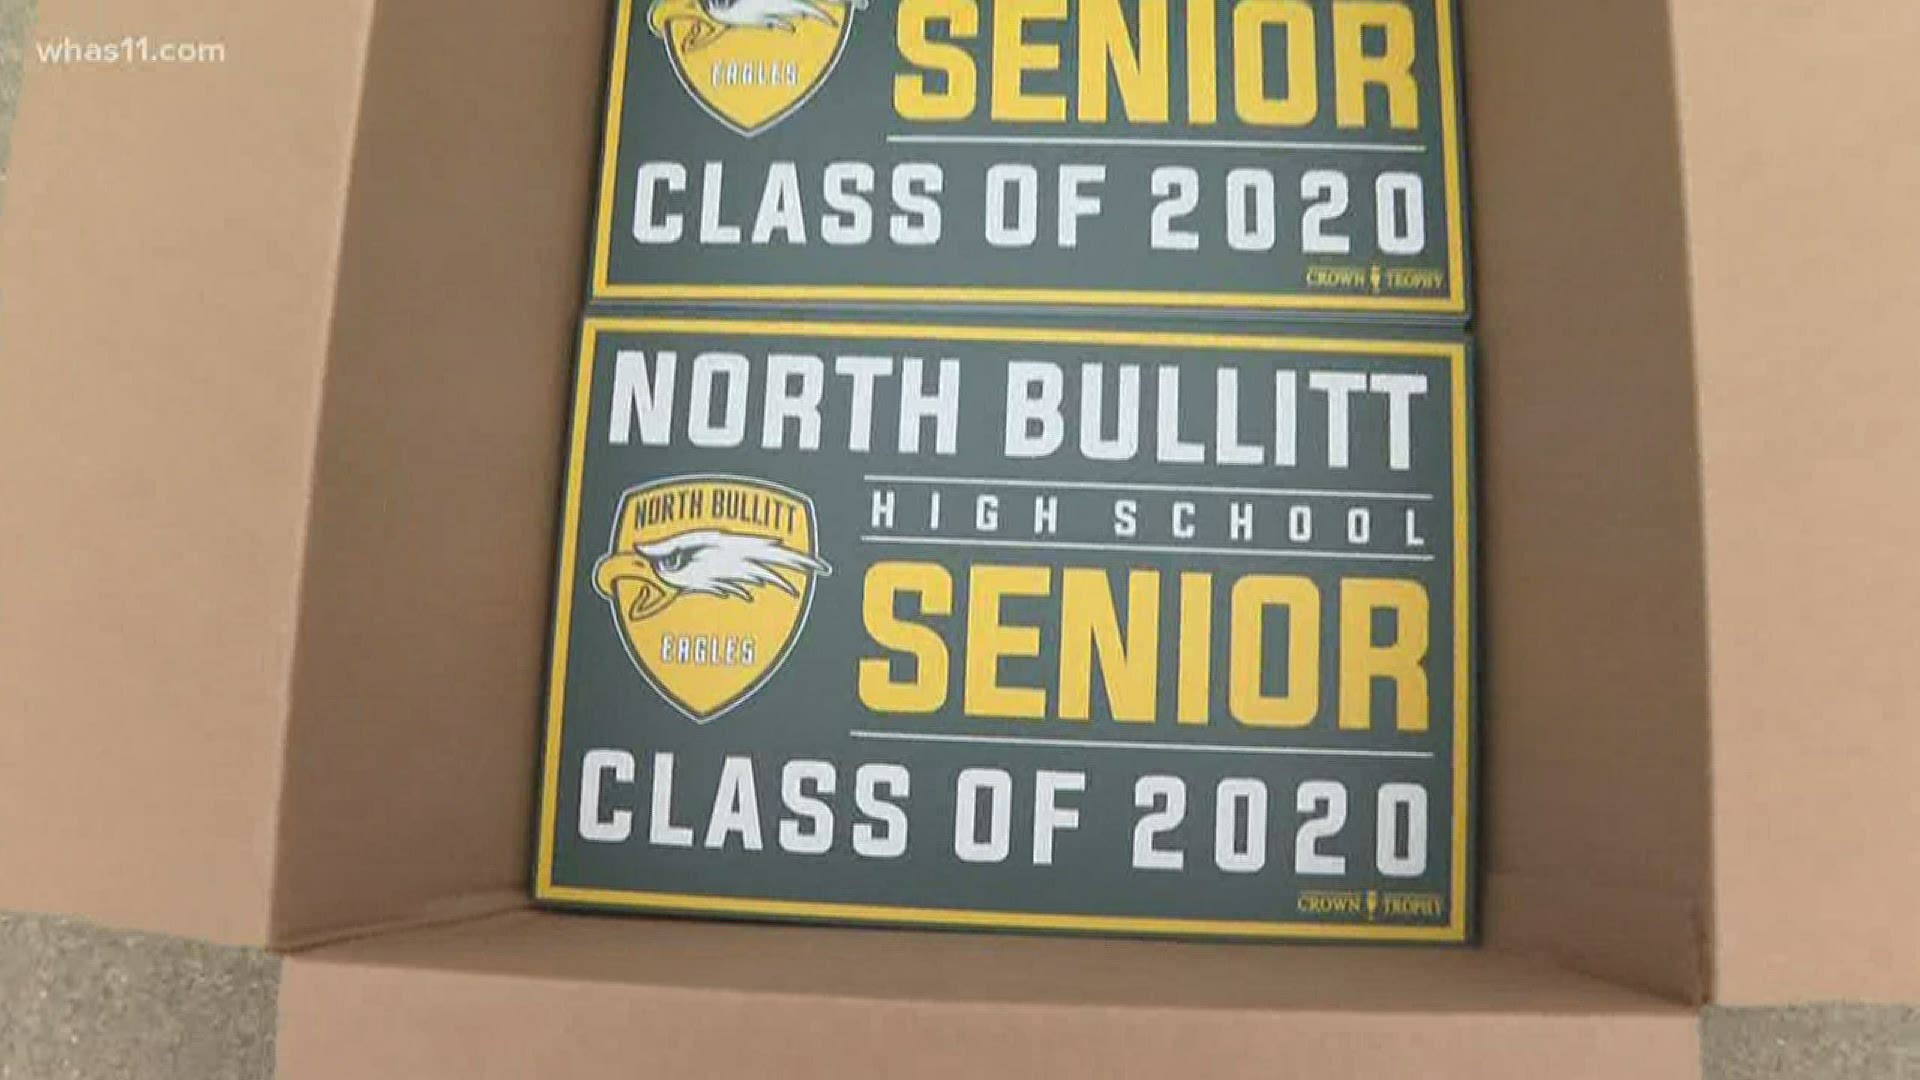 Seniors at North Bullitt High School won't get to experience normal traditions.